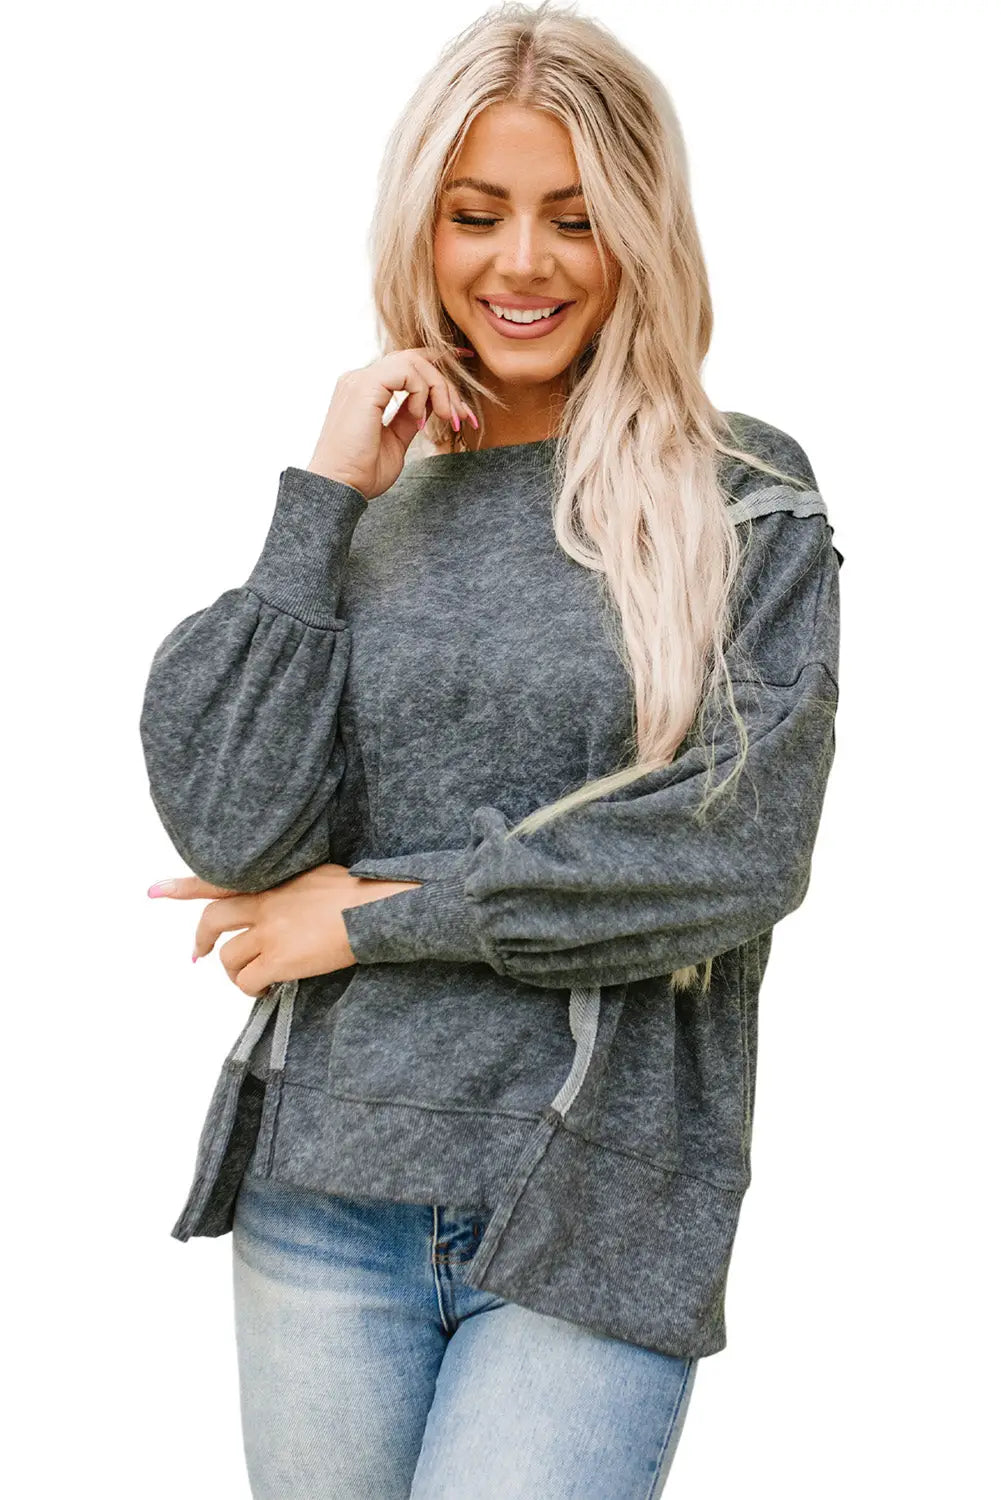 Gray acid wash relaxed fit seamed pullover sweatshirt with slits - sweatshirts & hoodies